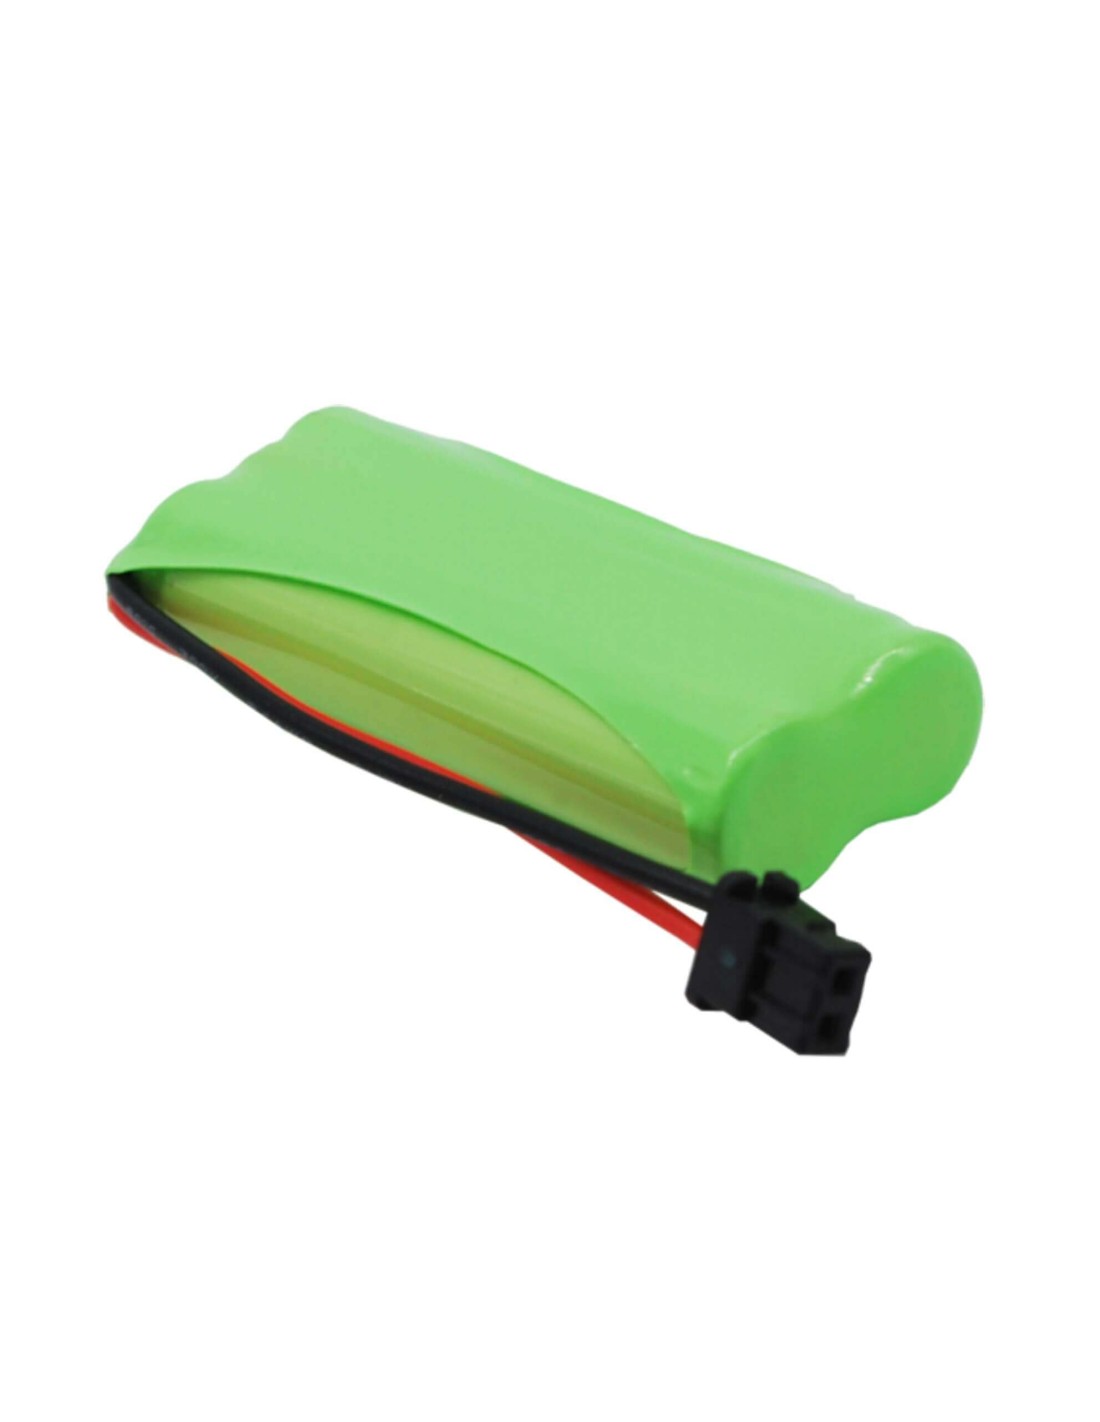 Battery for Toshiba, Dcx100, Dect 160, Dect 2.4V, 800mAh - 1.92Wh